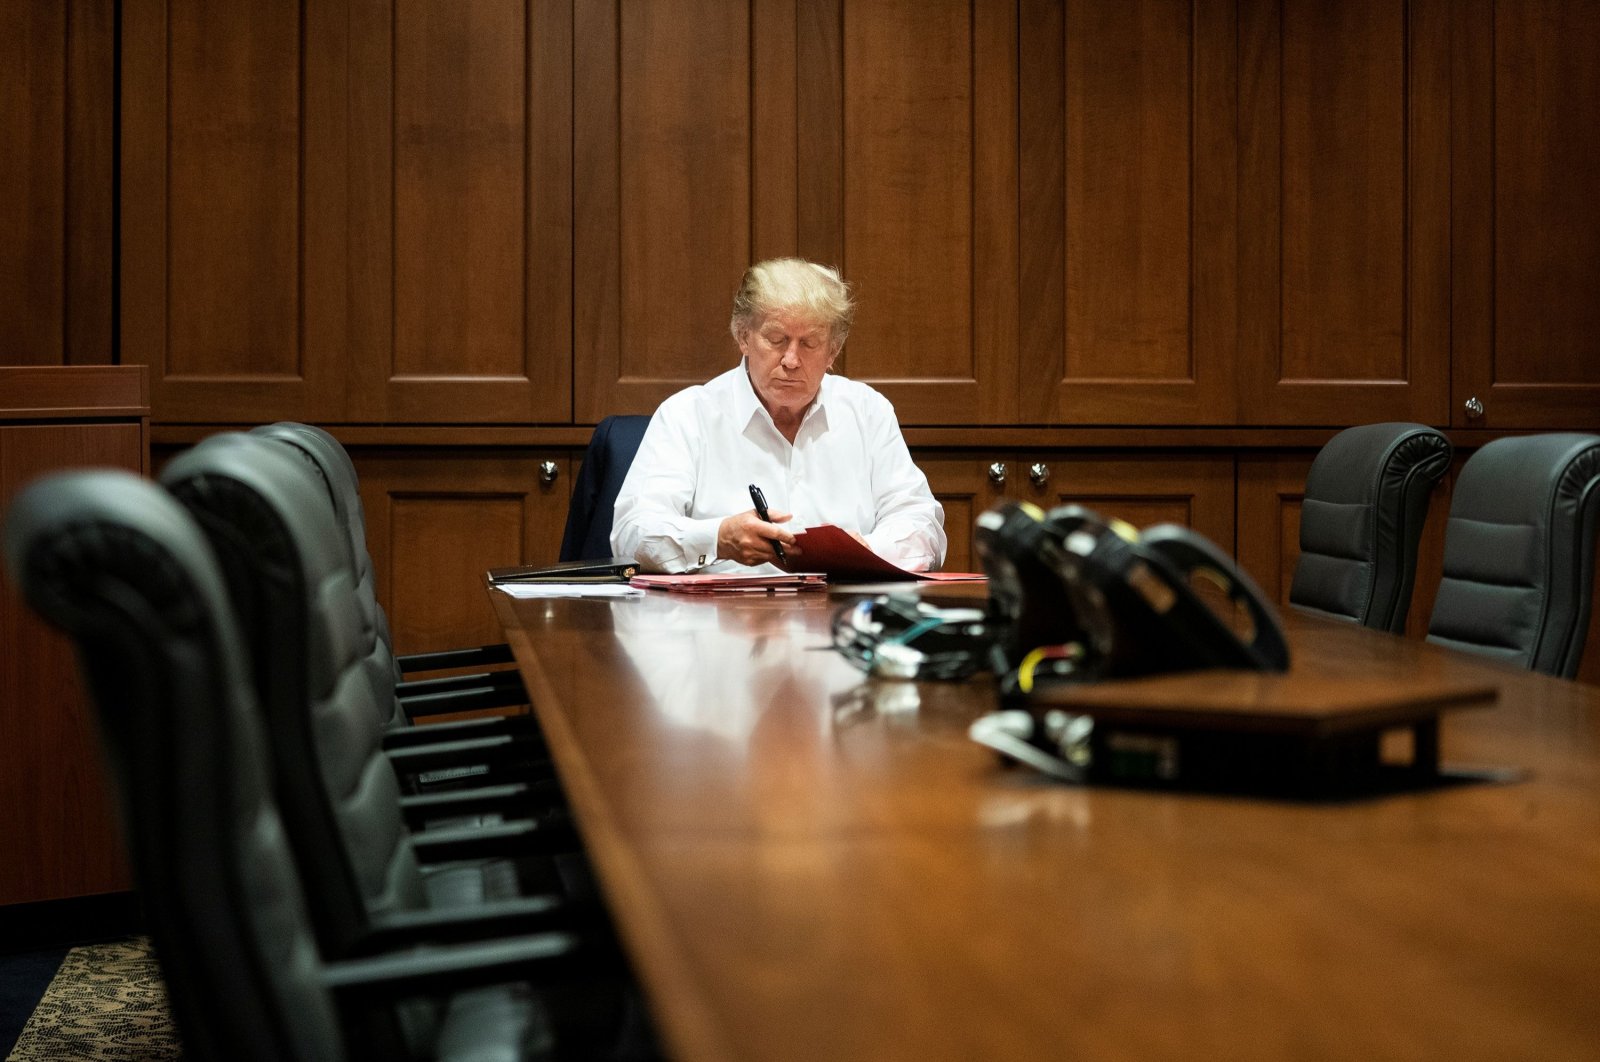 U.S. President Donald Trump works in a conference room while receiving treatment after testing positive for the coronavirus, at Walter Reed National Military Medical Center in Bethesda, Maryland, U.S., Oct. 3, 2020. (Reuters Photo)